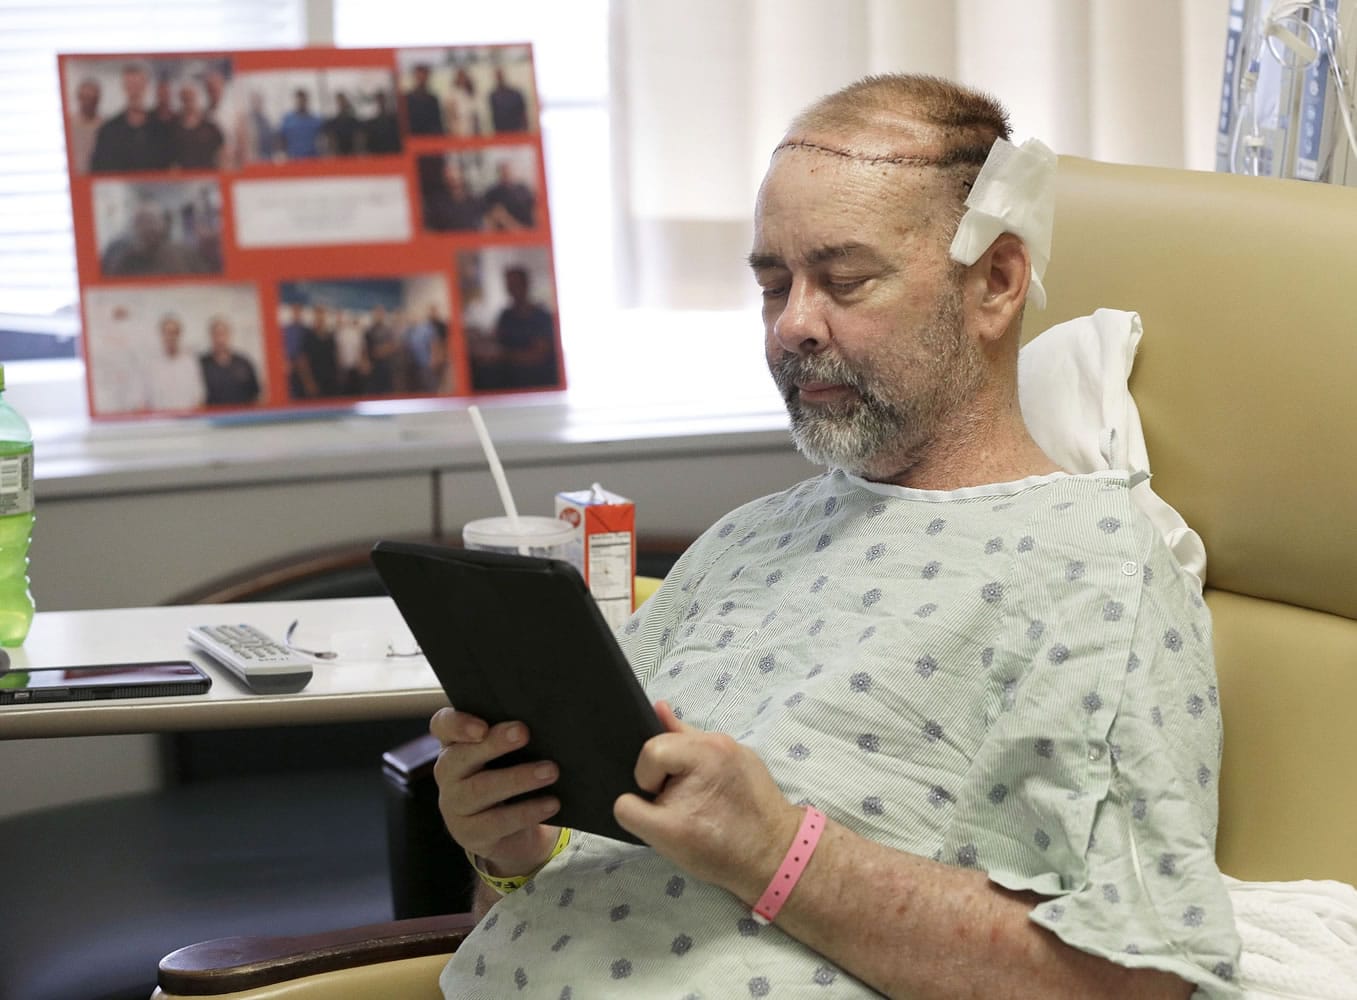 James Boysen reads messages in his hospital bed Wednesday at Houston Methodist Hospital, in Houston.